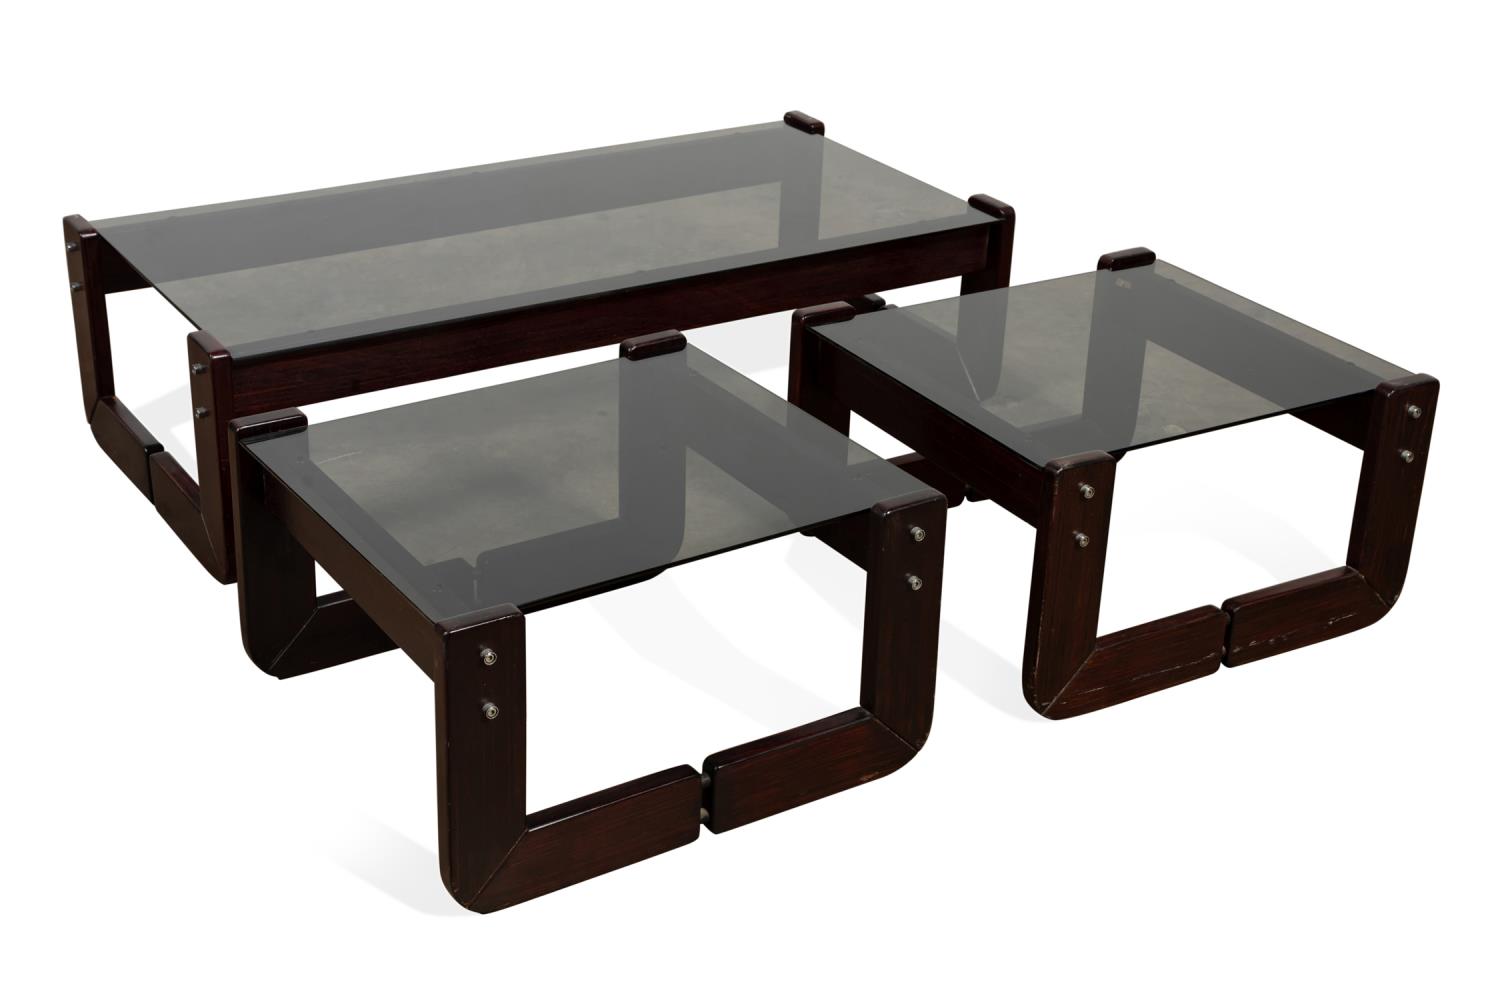 3PCS PERCIVAL LAFER COFFEE TABLE 2a5cd0